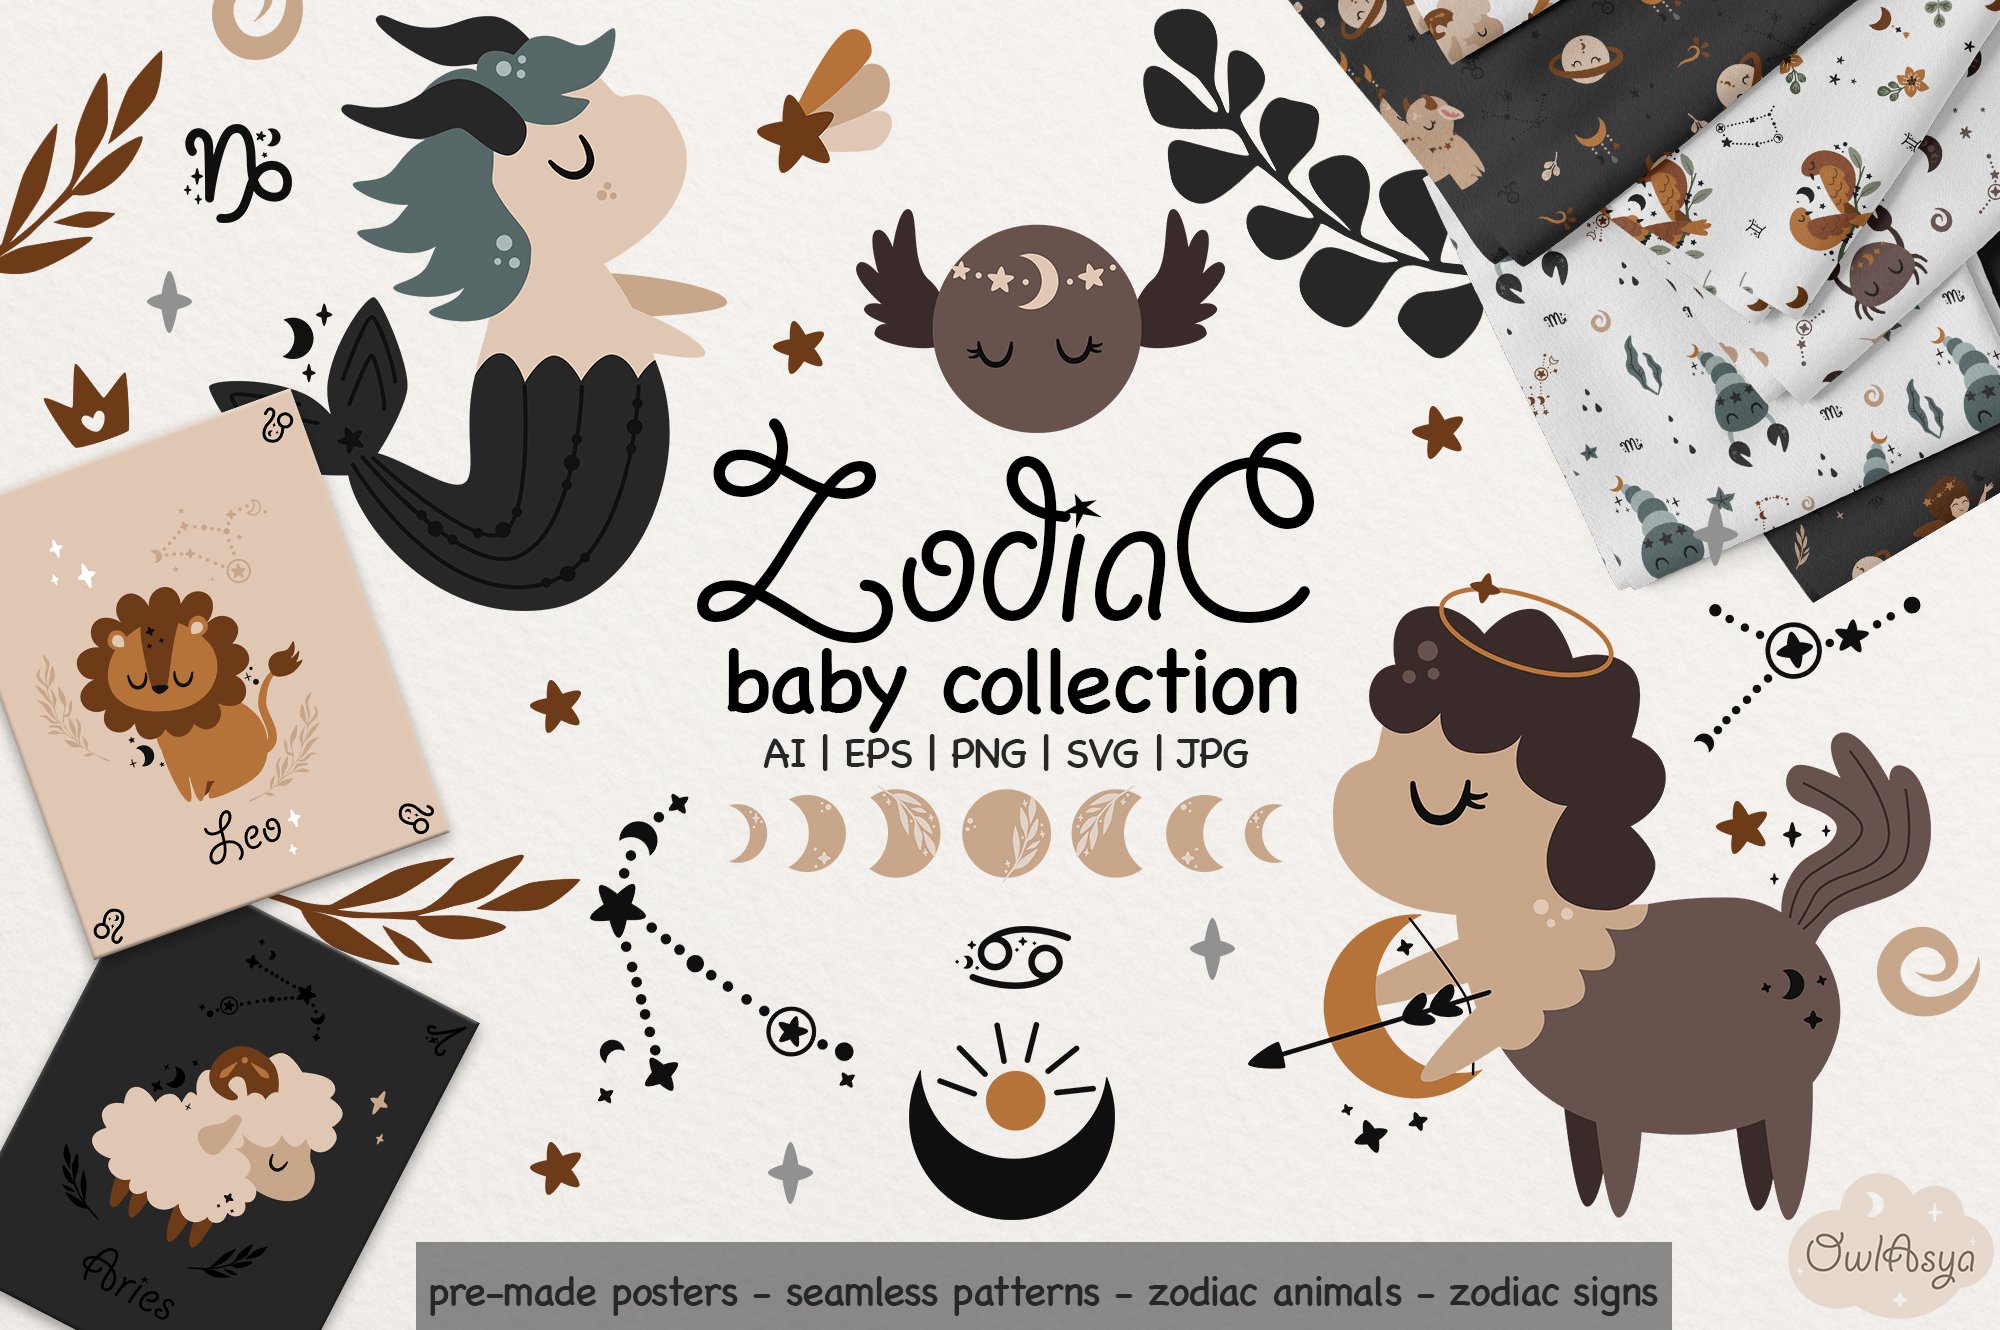 Zodiac baby collection cover image.